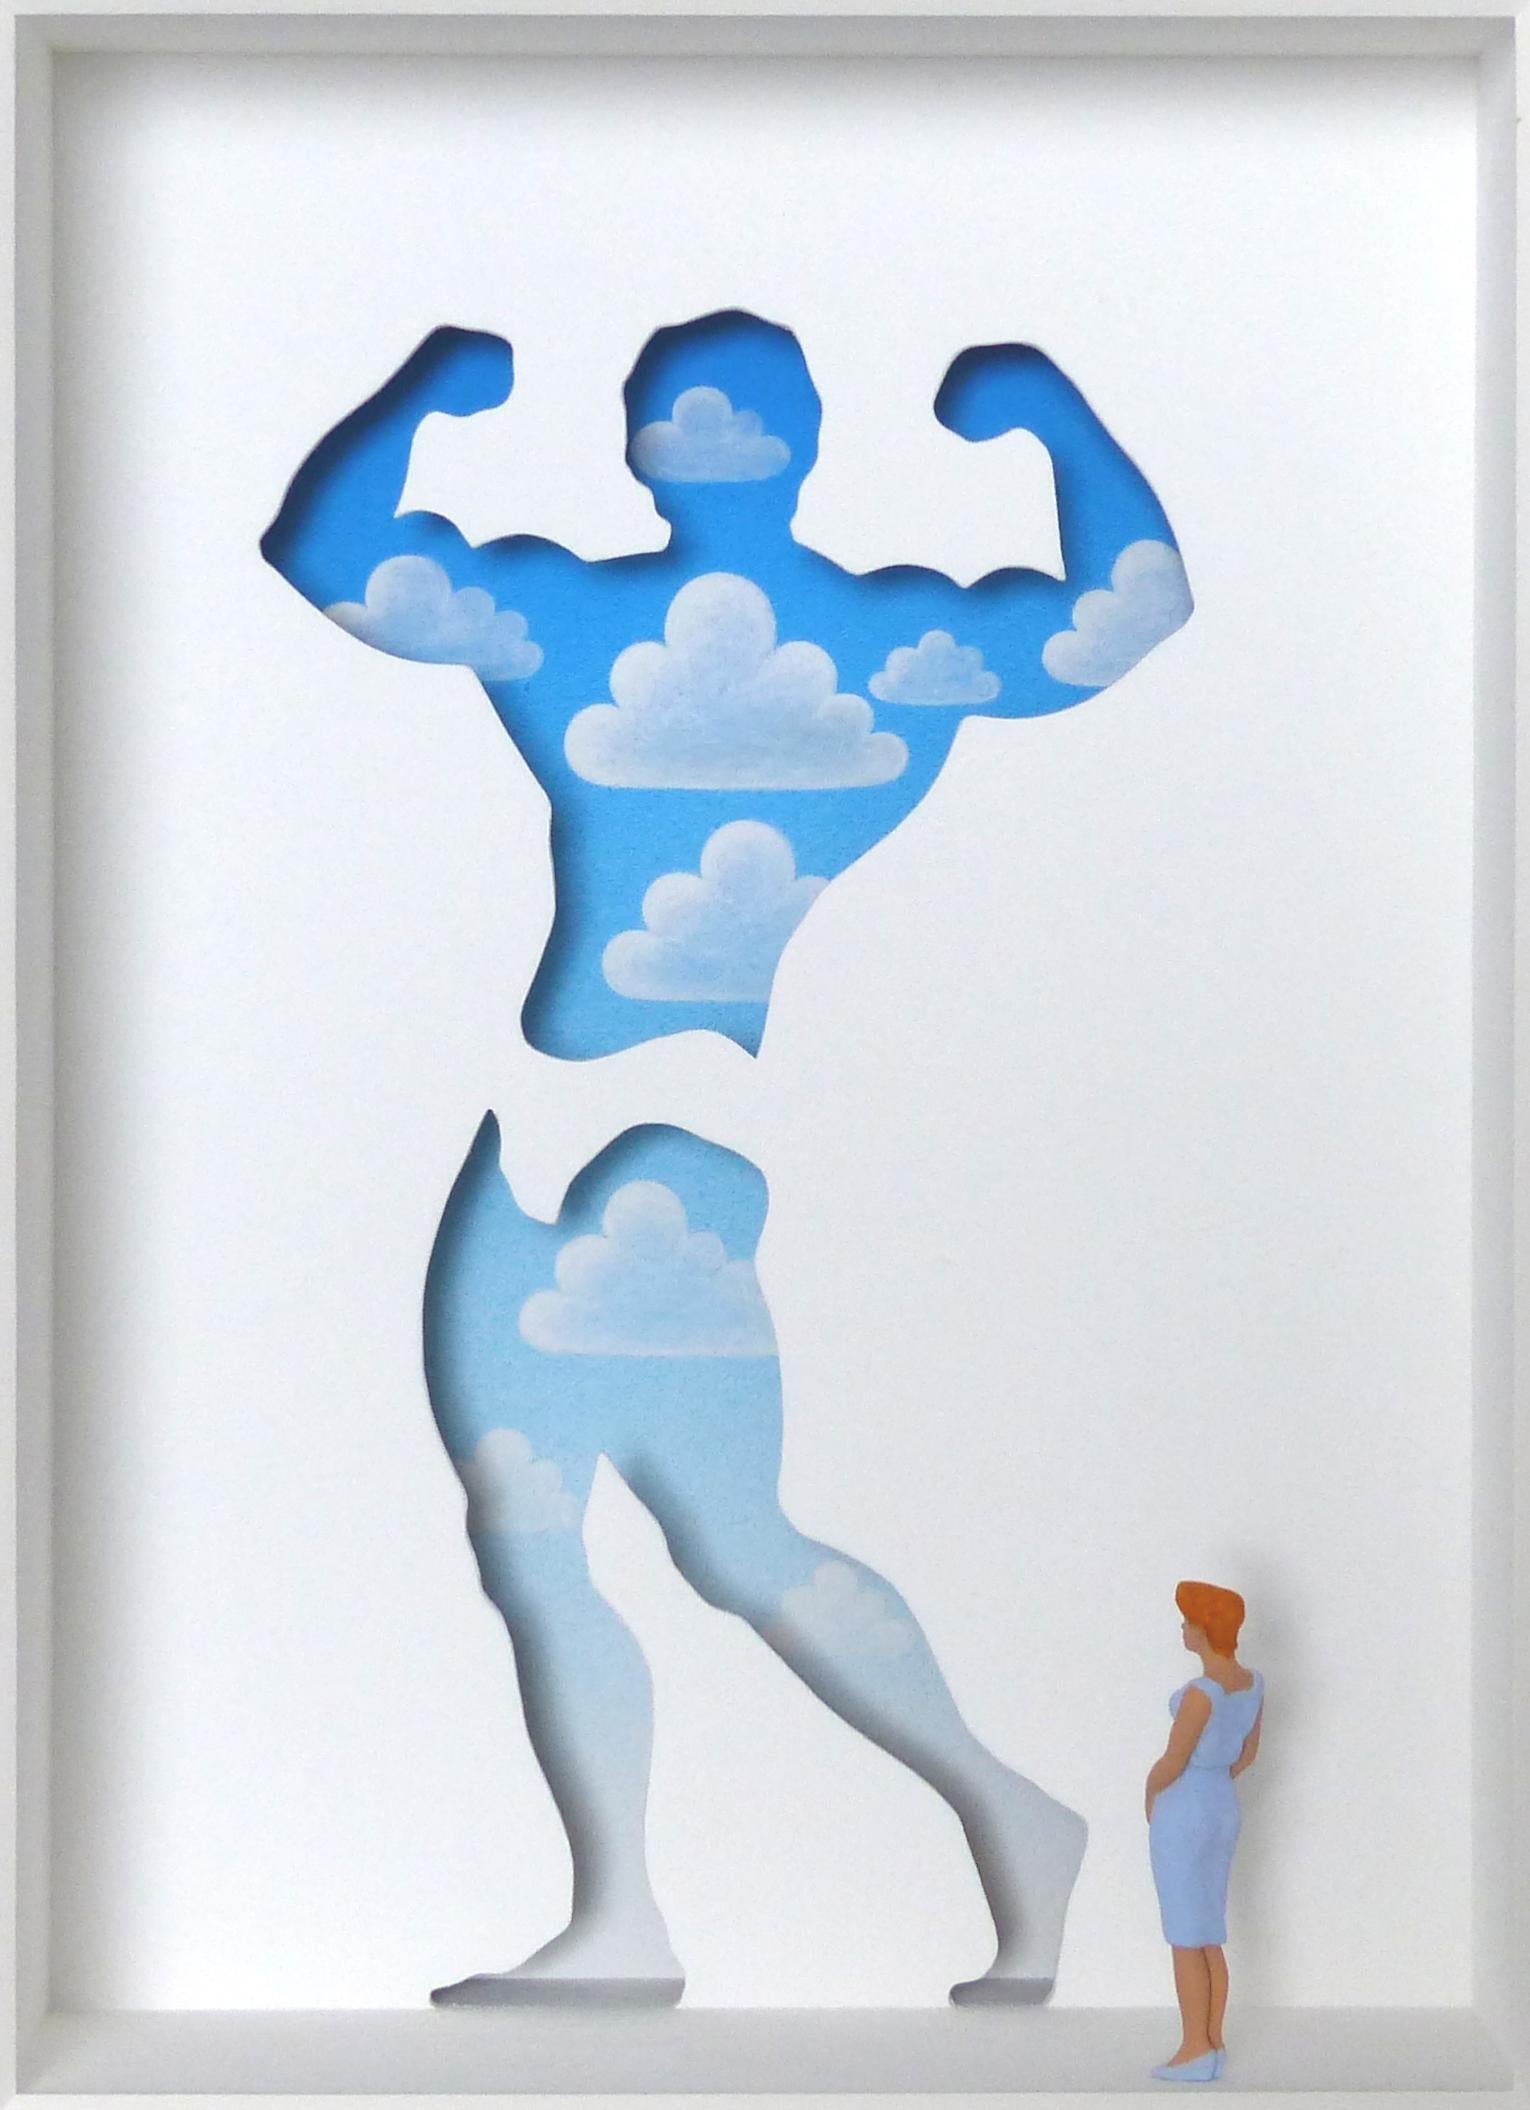 "Fatamorgana - Homage to Rene Magritte" is an original mixed media artwork by Volker Kuhn. The work is hand-signed by the artist below the artwork on the mat. 53 x 43 cm framed in a silver wood-framing with simple hanging mechanism on back.  Stamp